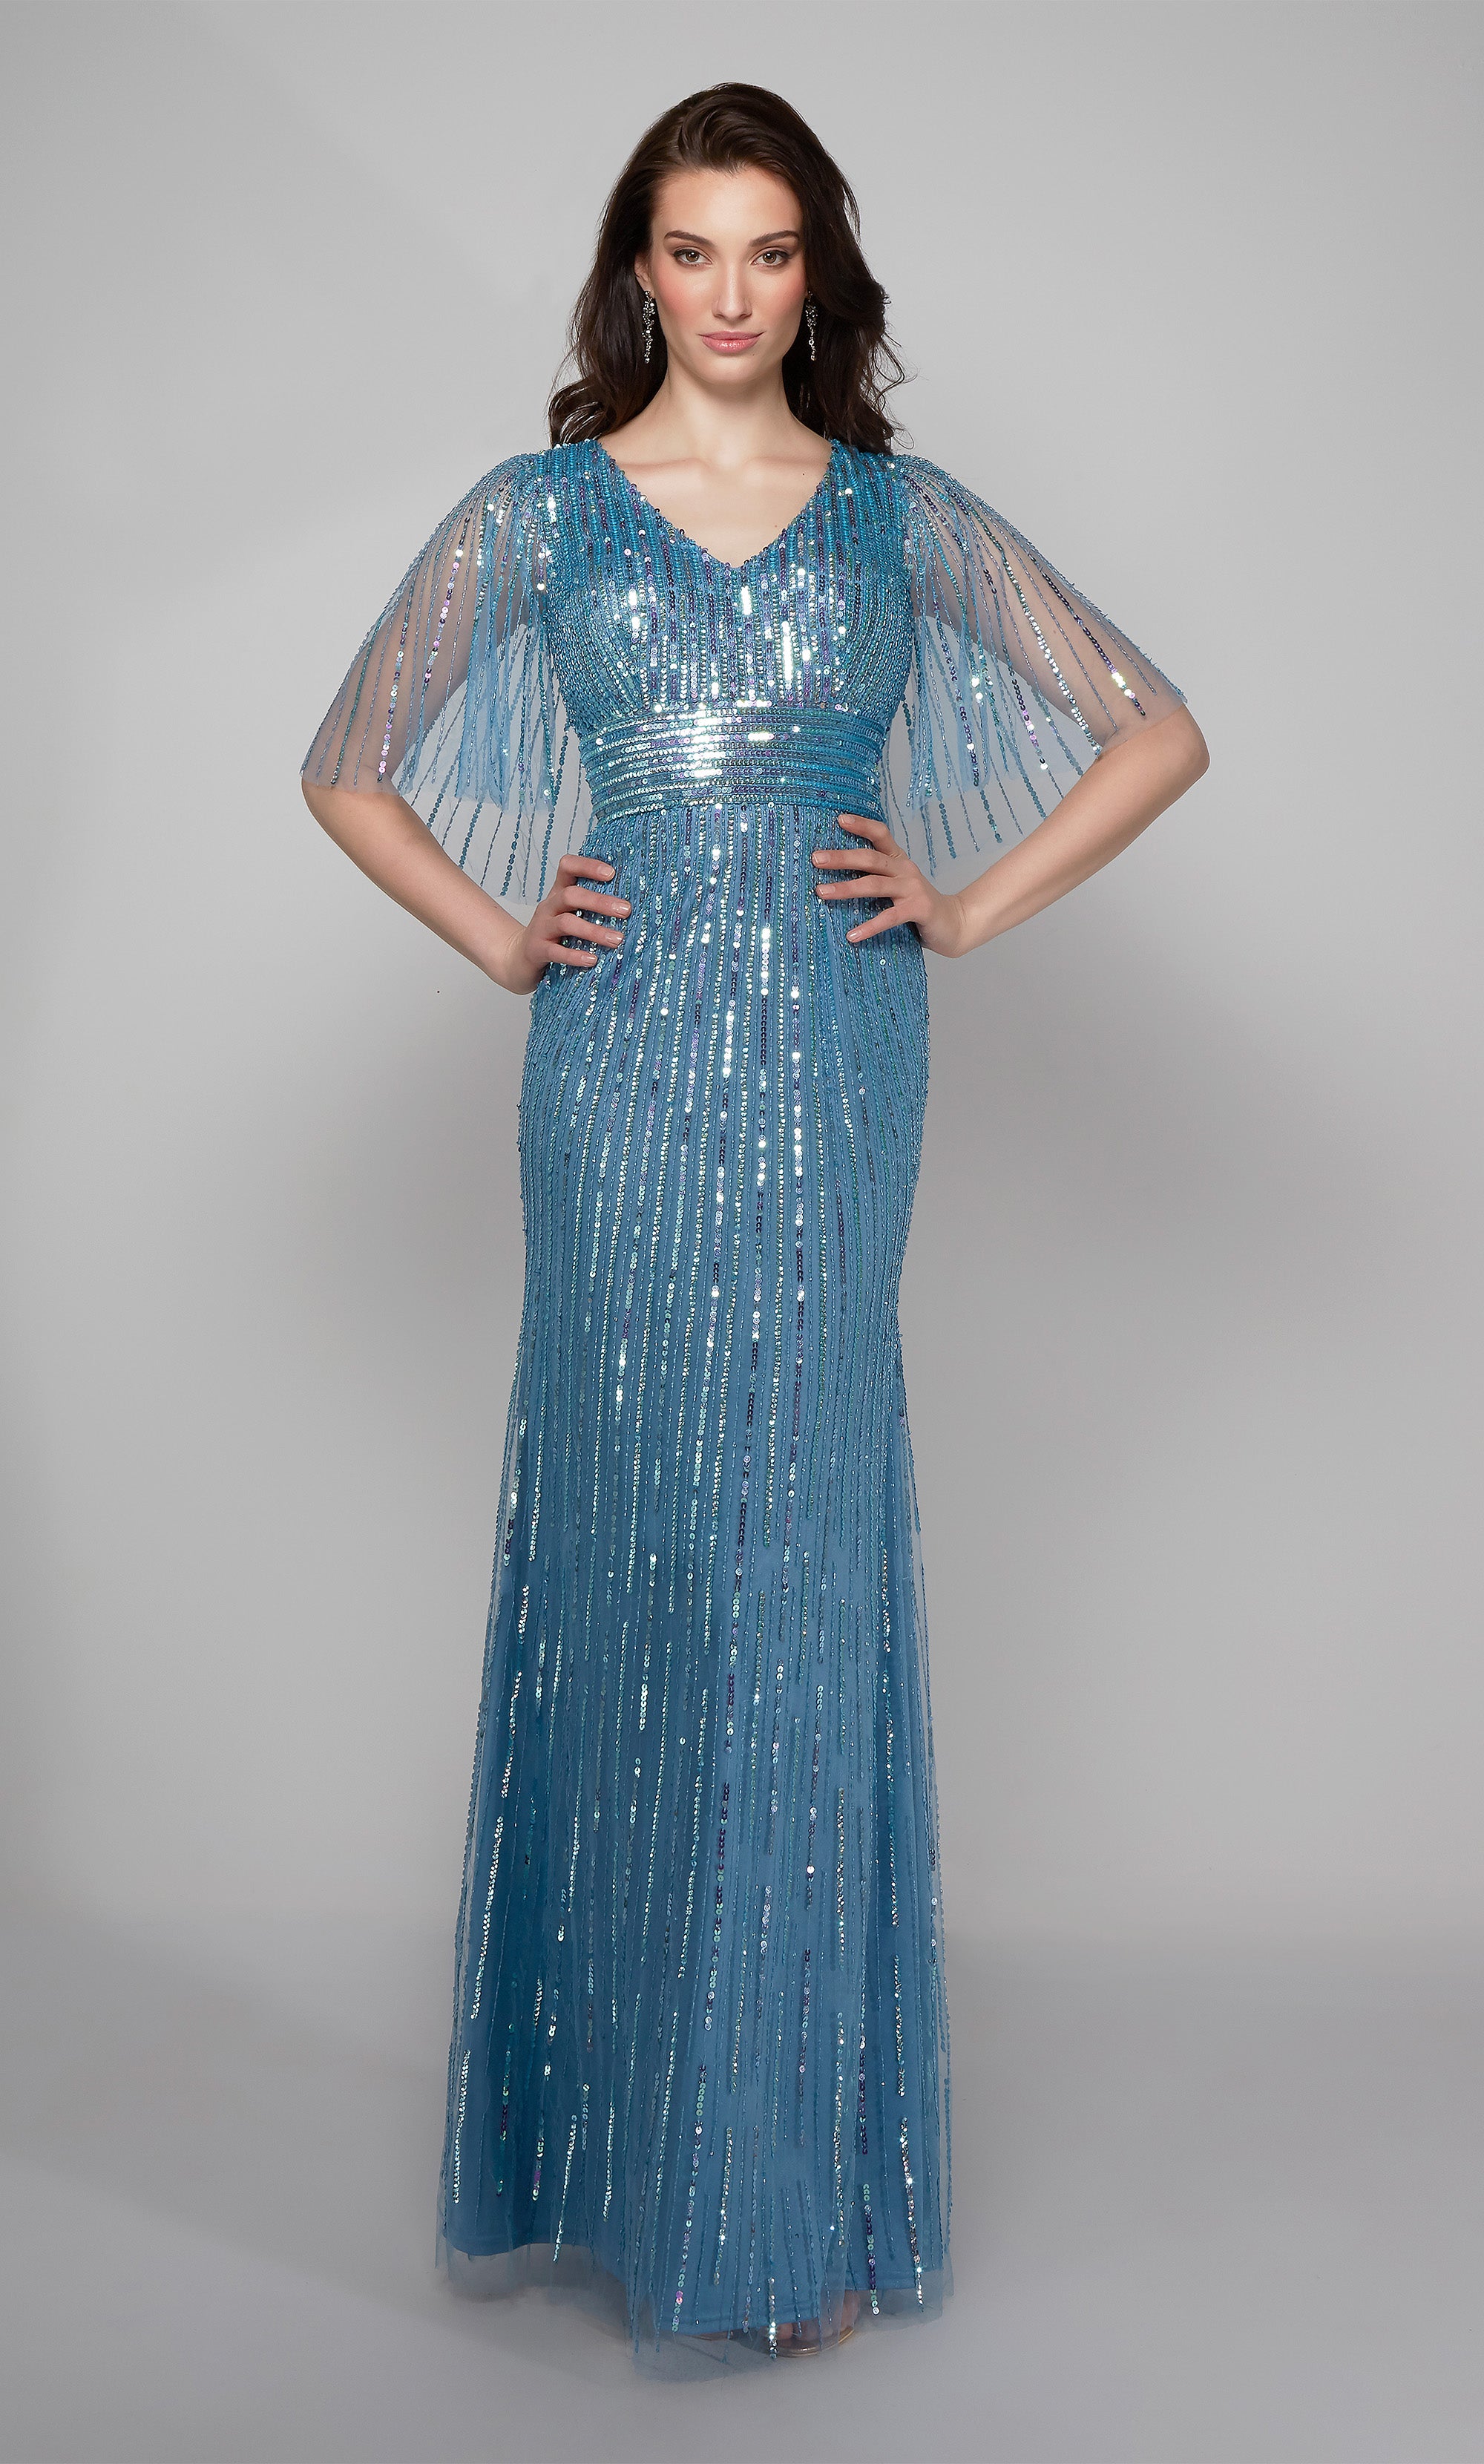 Jovani 23891 Peacock Embellished Long Cape Evening Gown